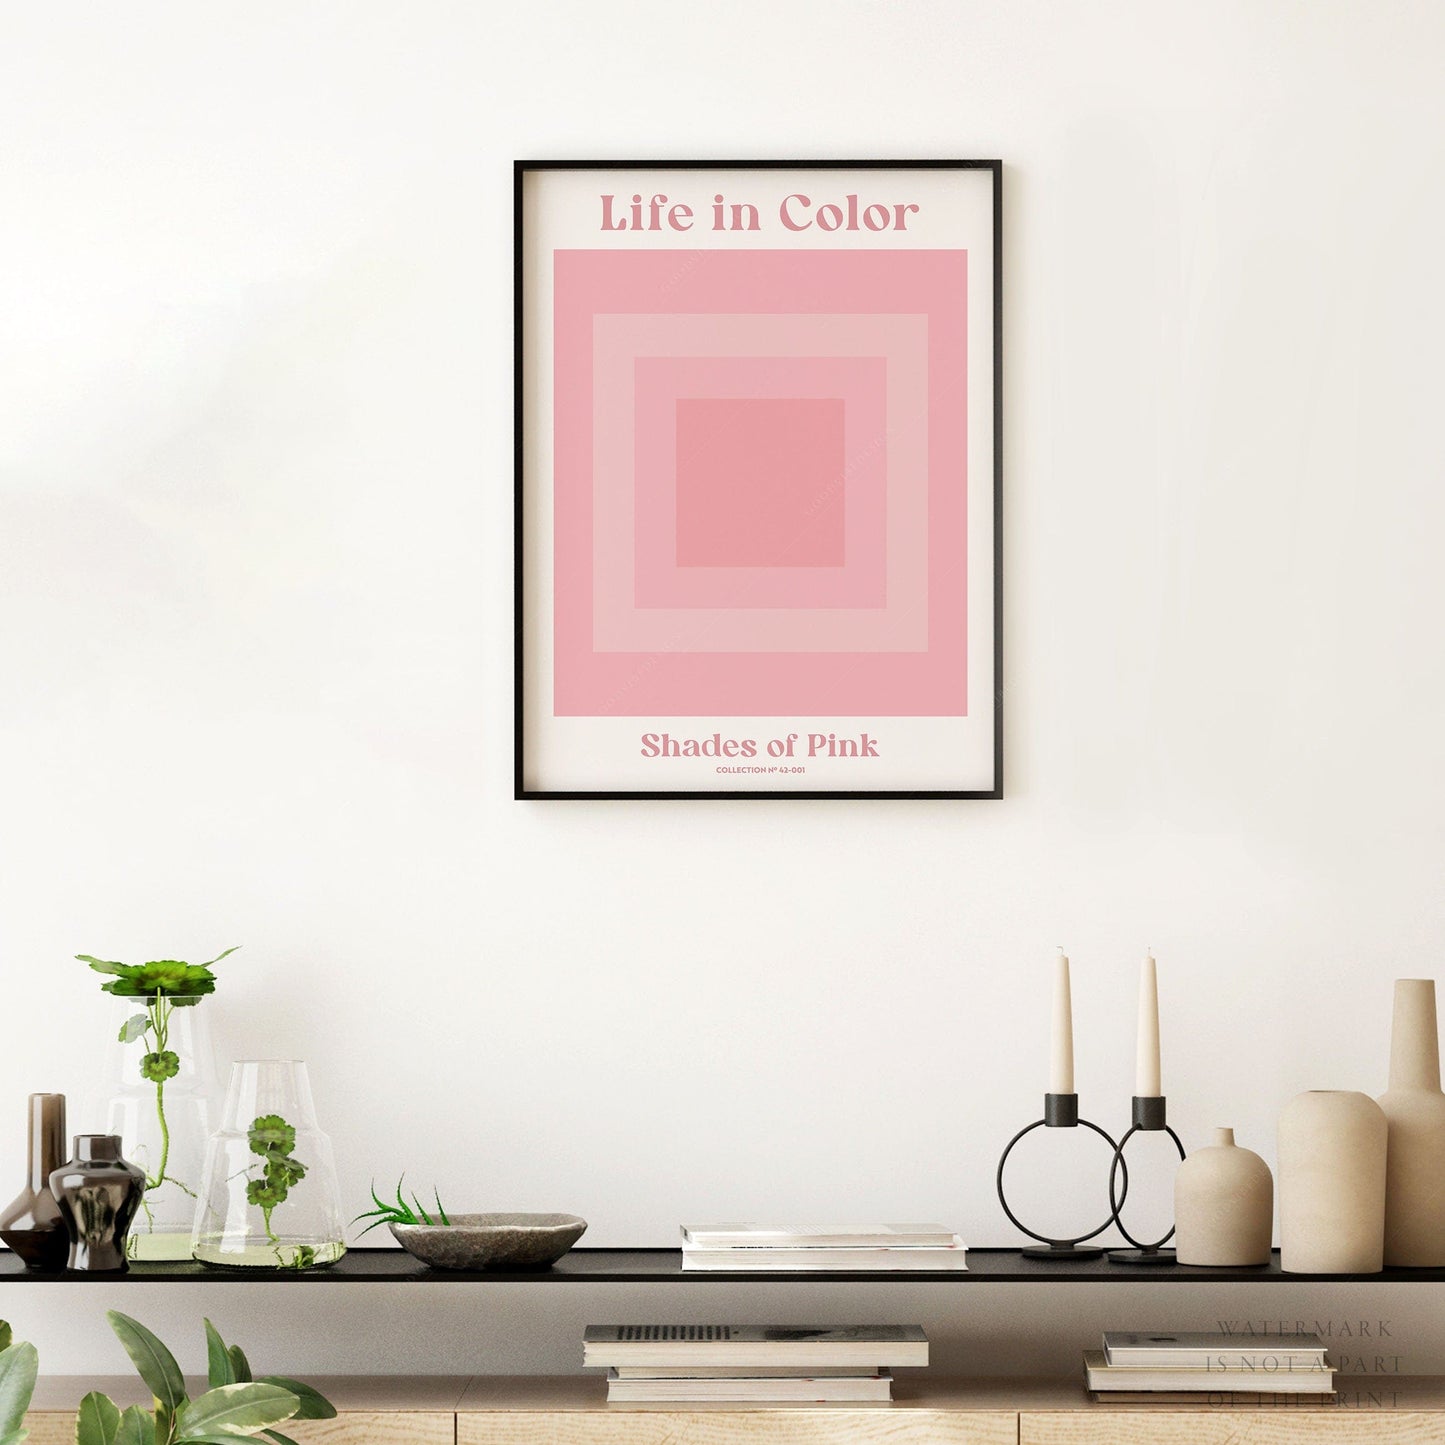 Home Poster Decor Pink Wall Art, Colorful Decor, Minimalist Artwork, Pink Room Decor, Abstract pink art, Modern apartment decor, Geometric shapes 1